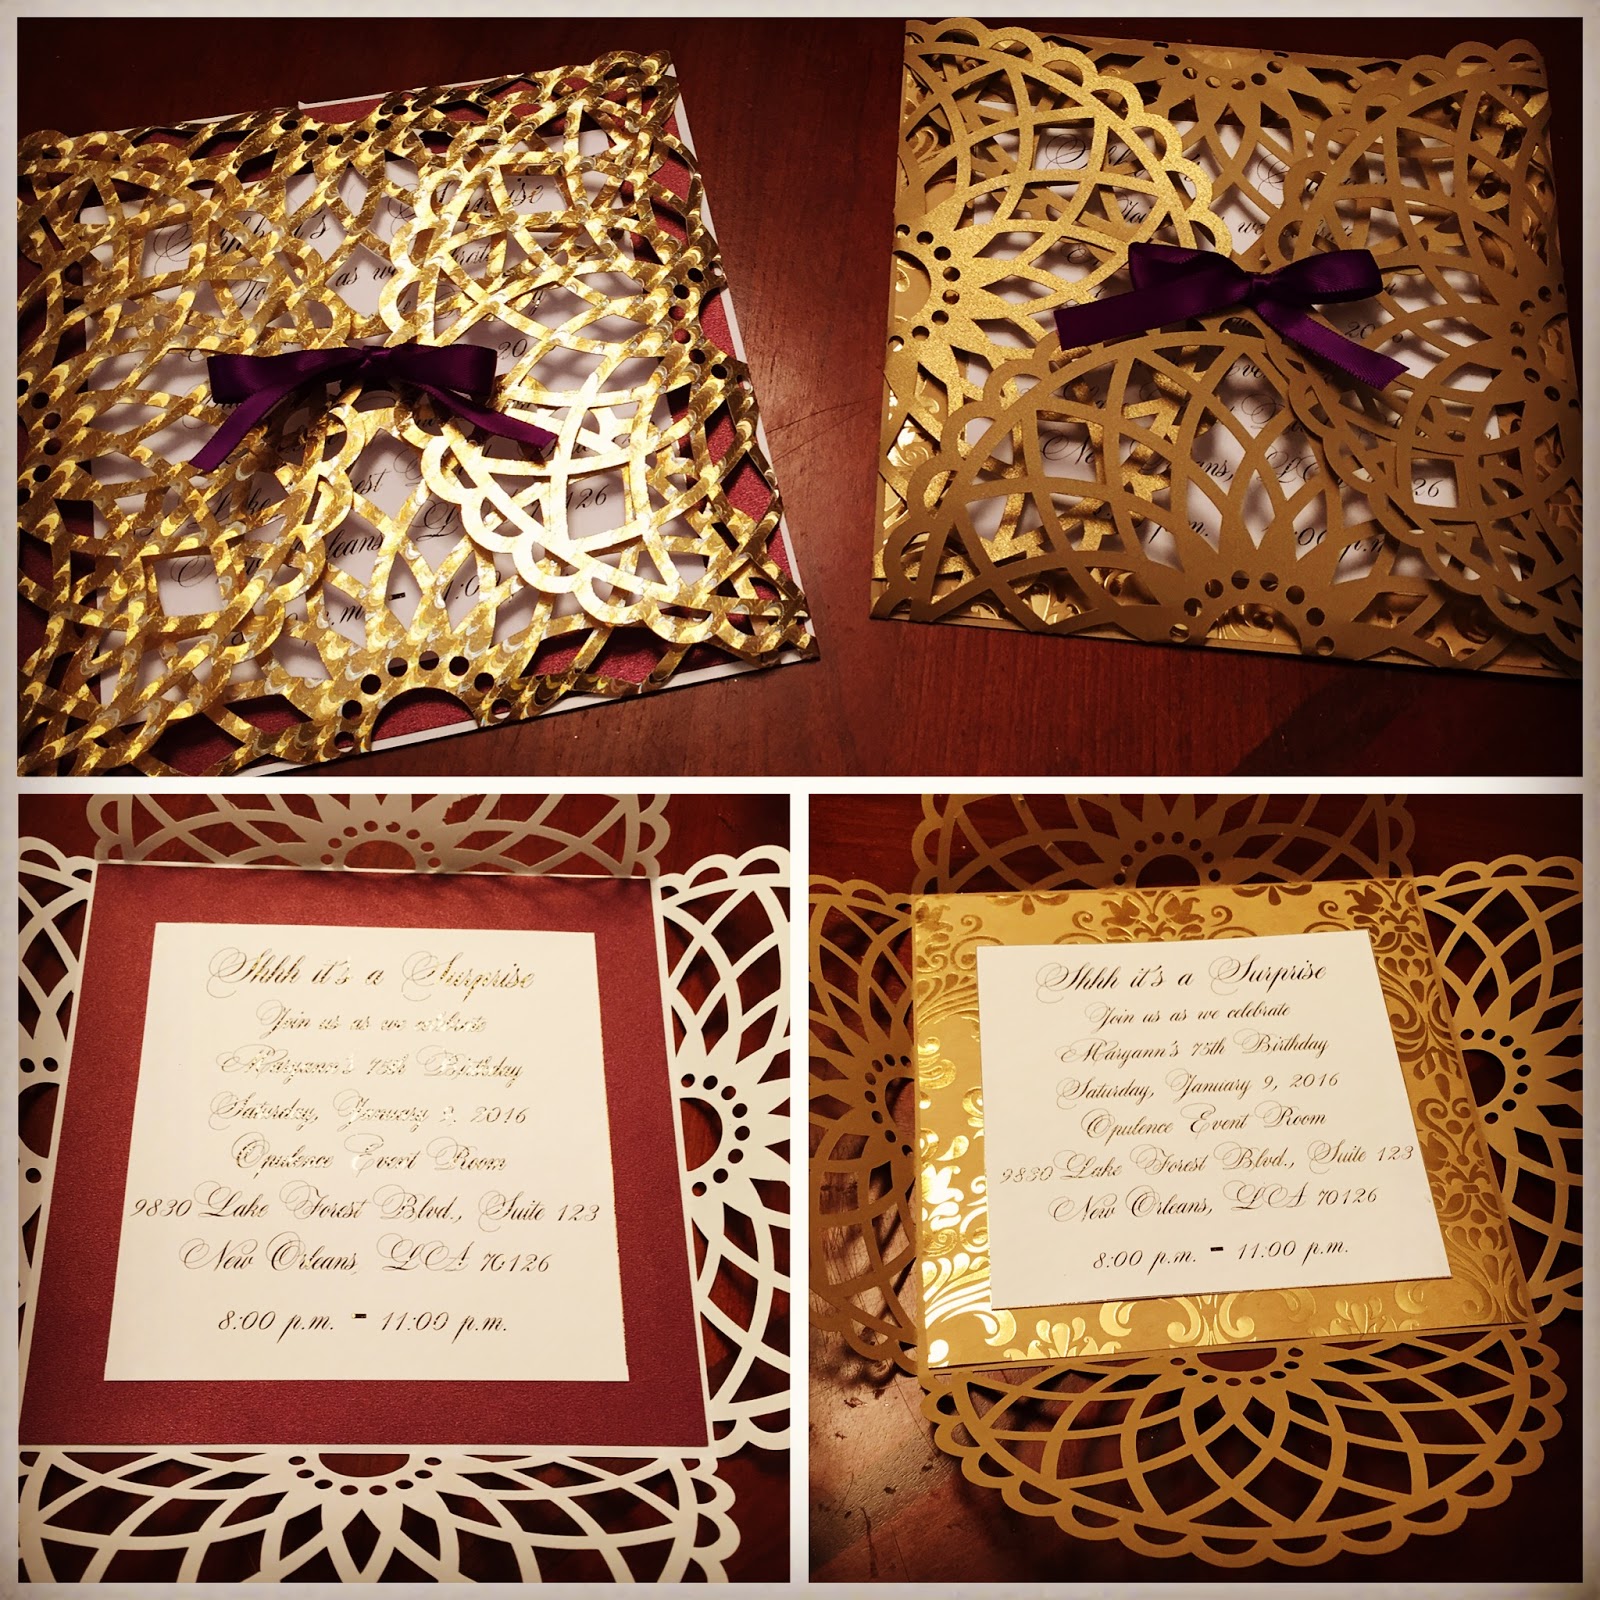 G.I.T. Creative Event Planning, LLC: Designer Card Wrap Invitations (Gucci and Louis Vuitton)